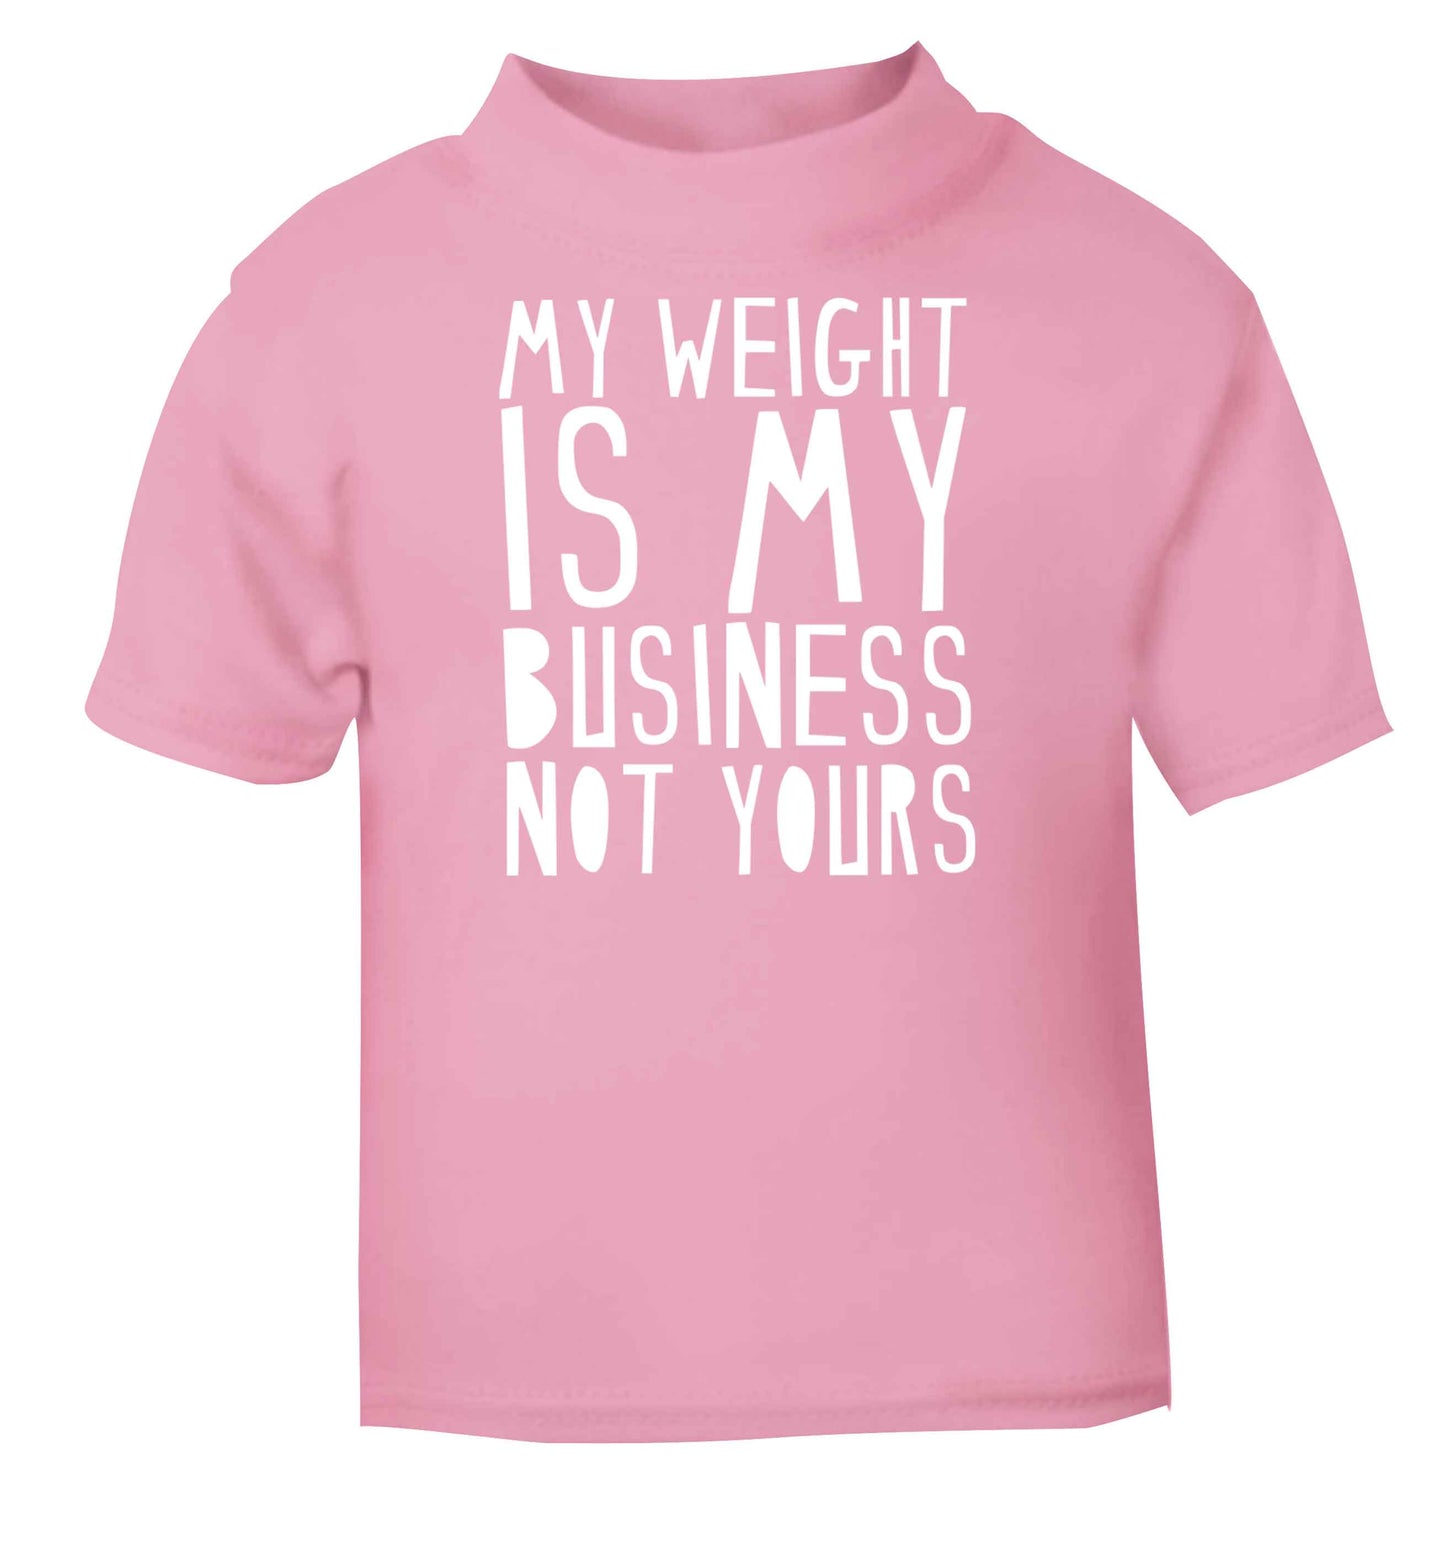 My weight is my business not yours light pink baby toddler Tshirt 2 Years